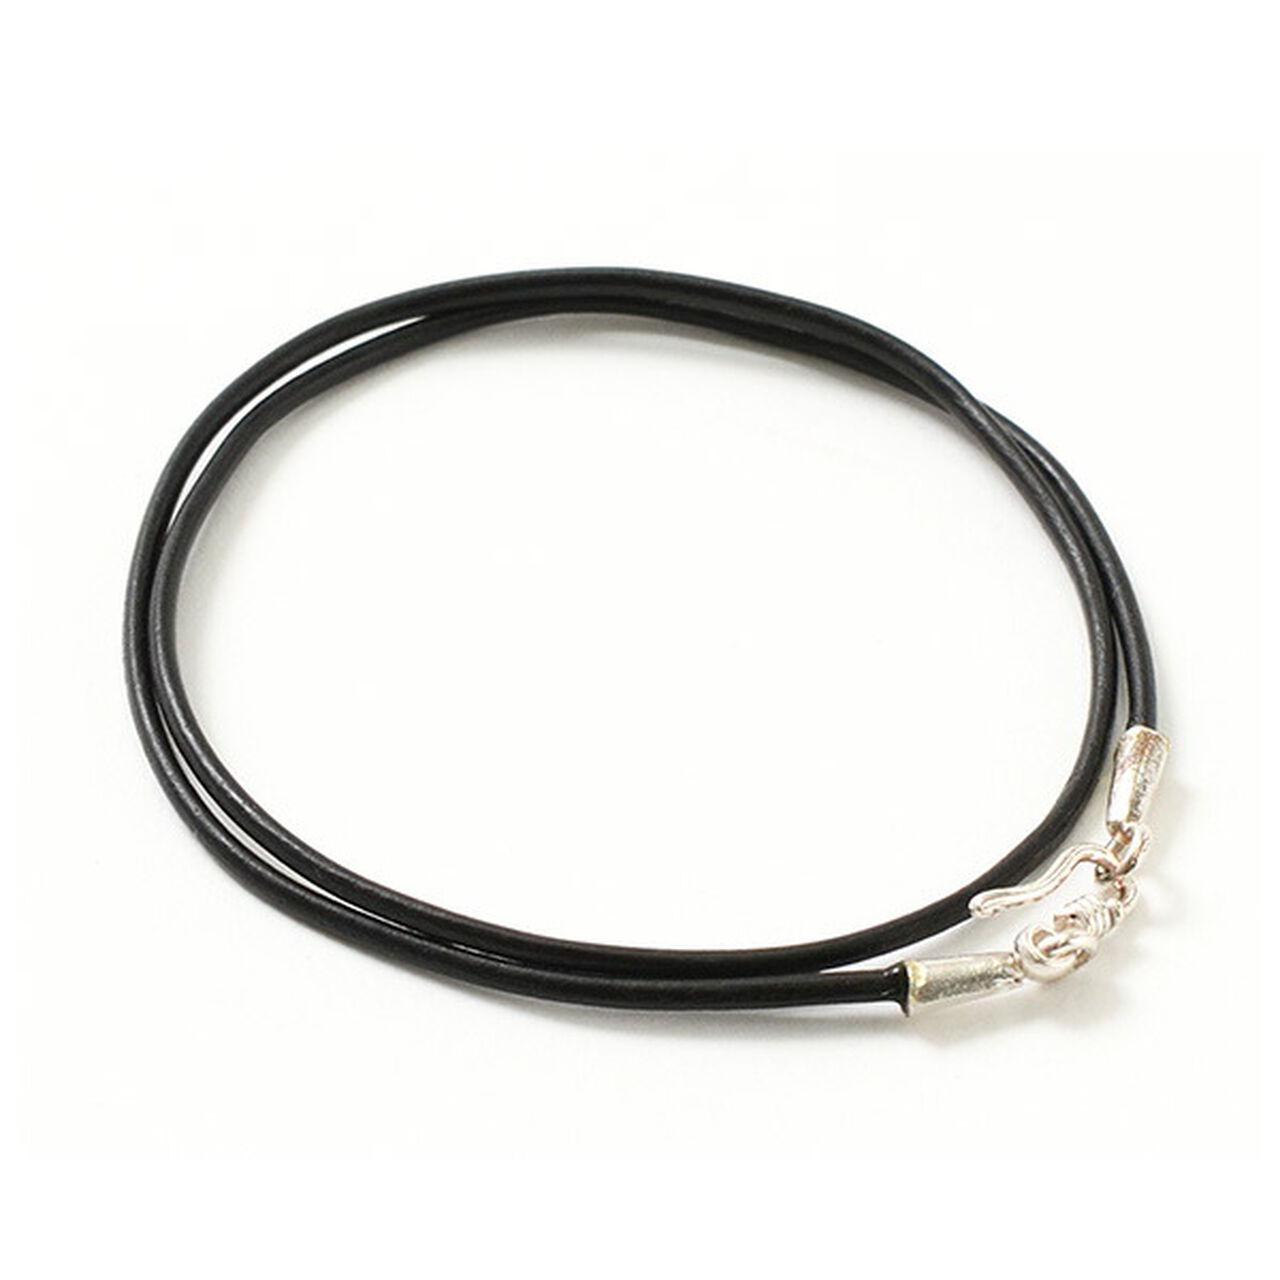 Leather choker necklace in calen silver.,Black, large image number 0